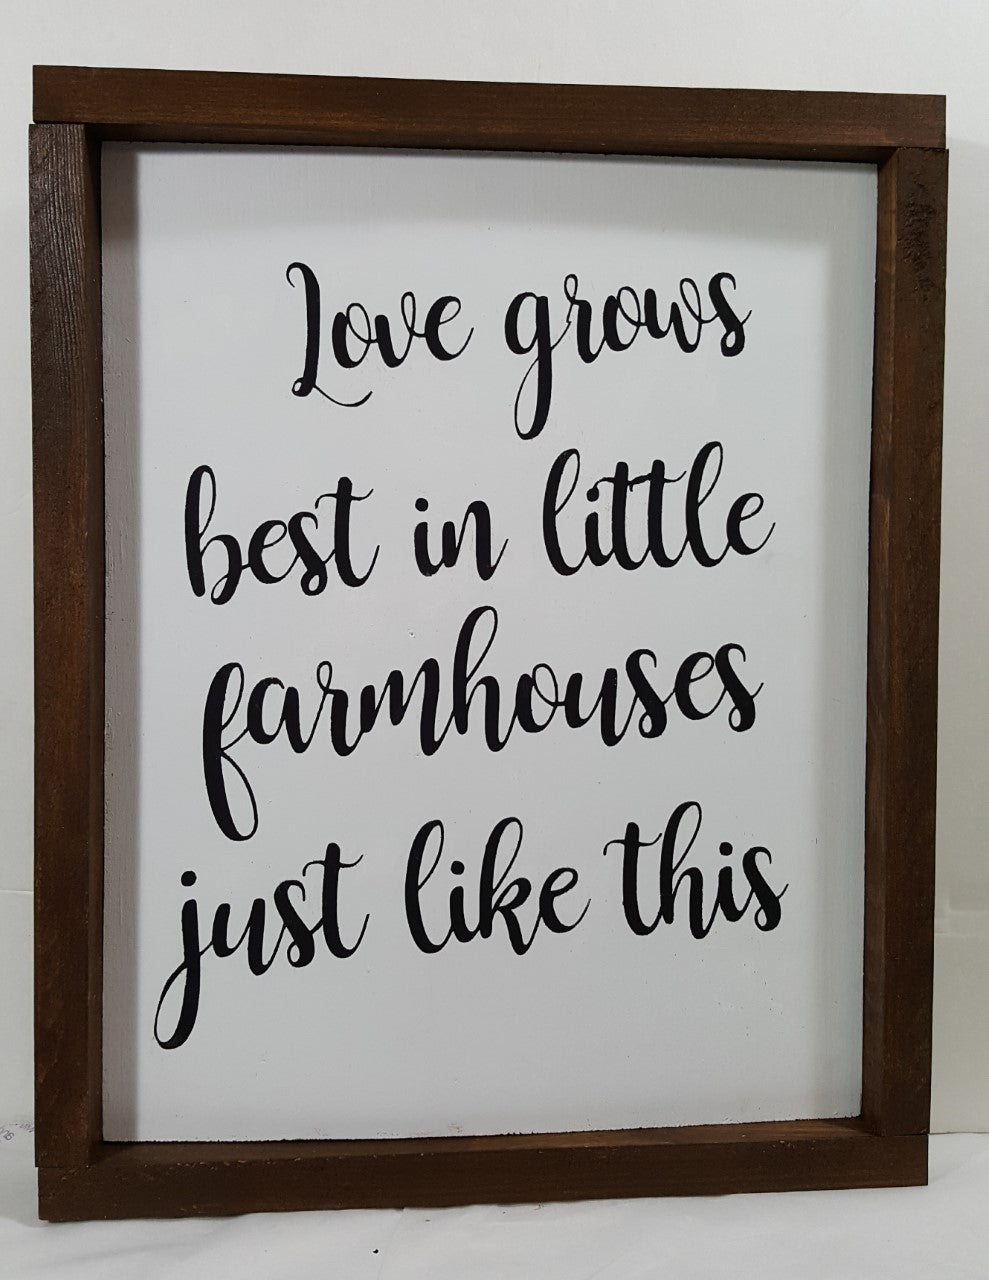 Love Grows Best In Little Farmhouses Just Like This Framed Sign Farmhouse 9